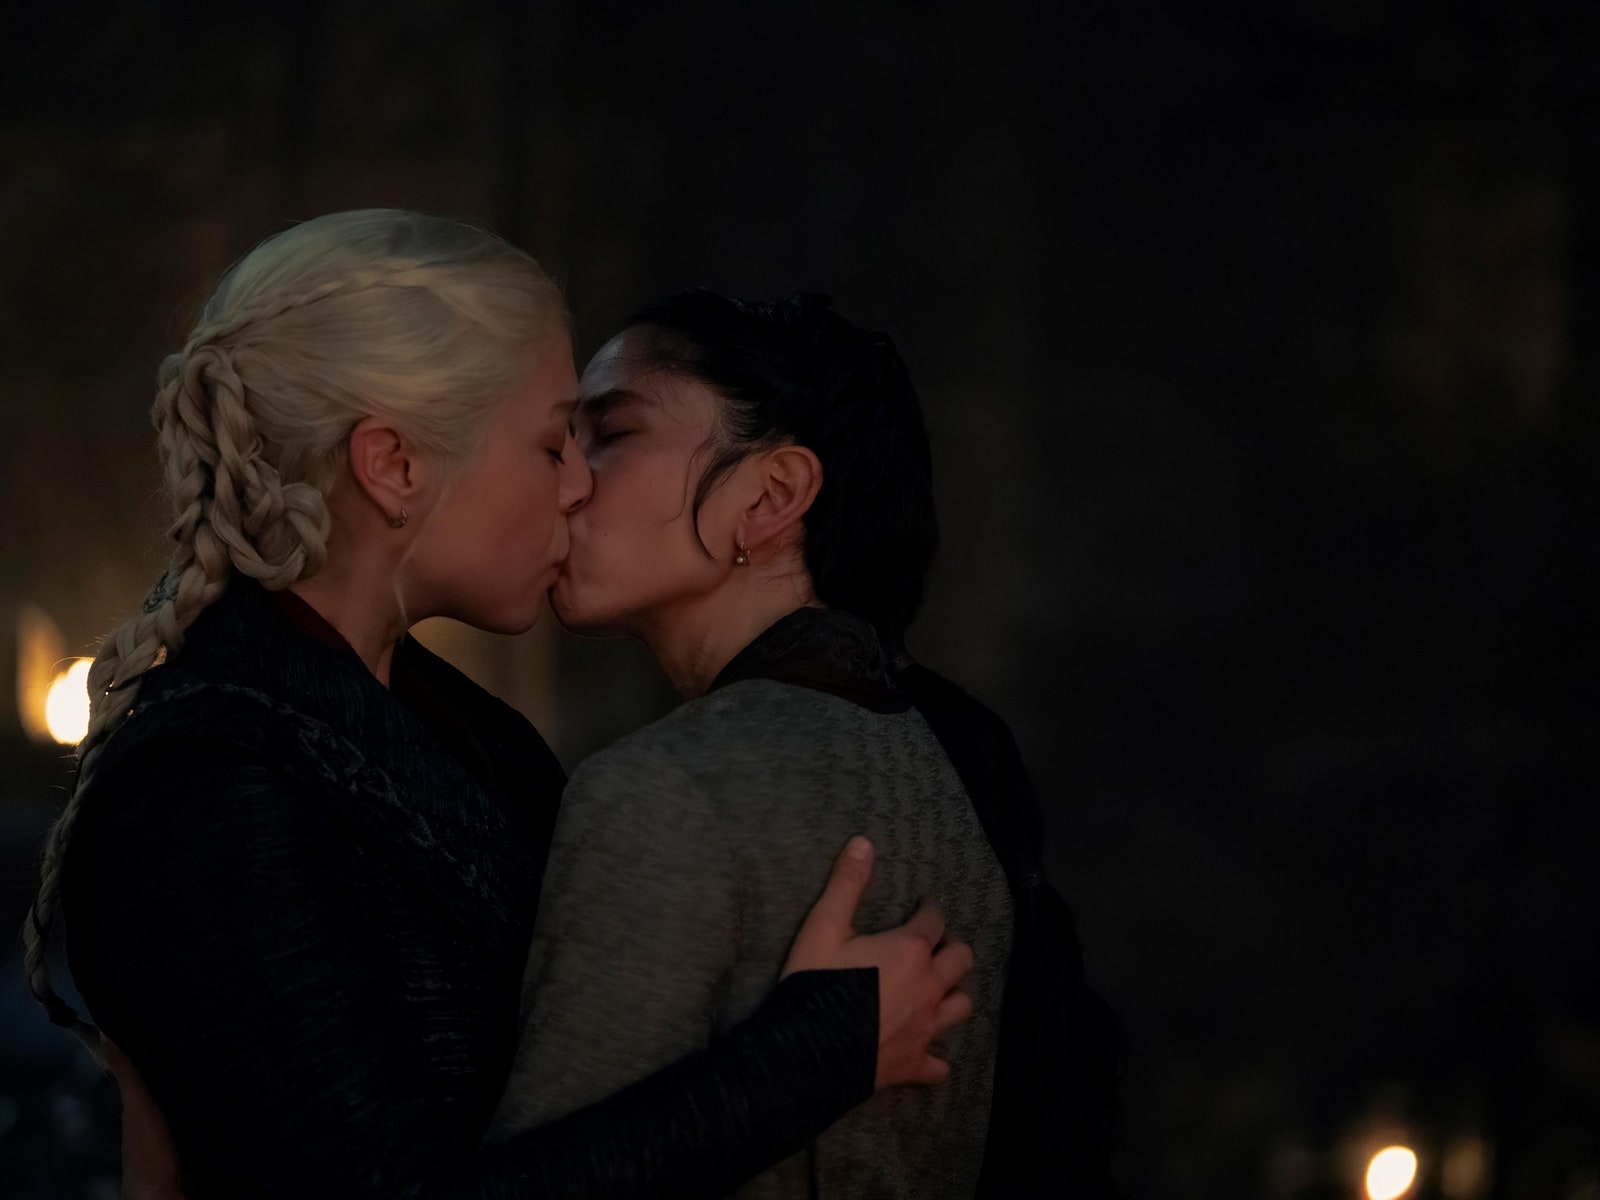 Angry House of the Dragon Fans Claim One Gay Kiss “Ruined” the Series